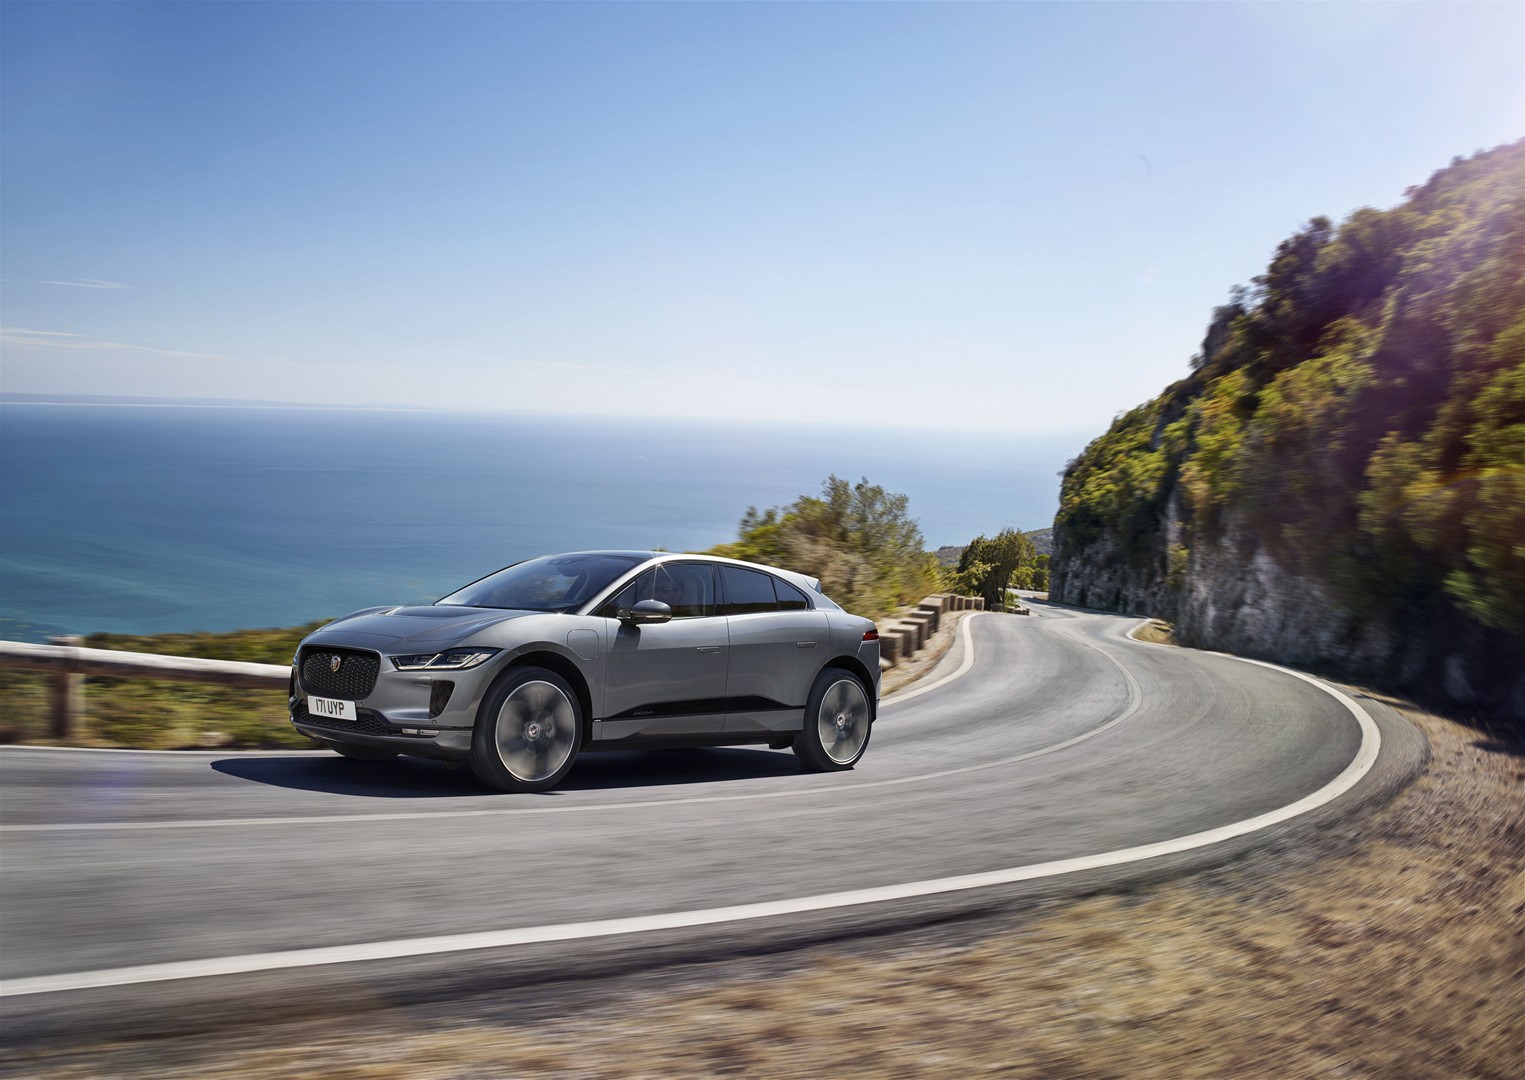 https://s1.cdn.autoevolution.com/images/news/gallery/2020-jaguar-i-pace-update-offers-234-miles-of-range-thanks-to-etrophy-know-how_50.jpg